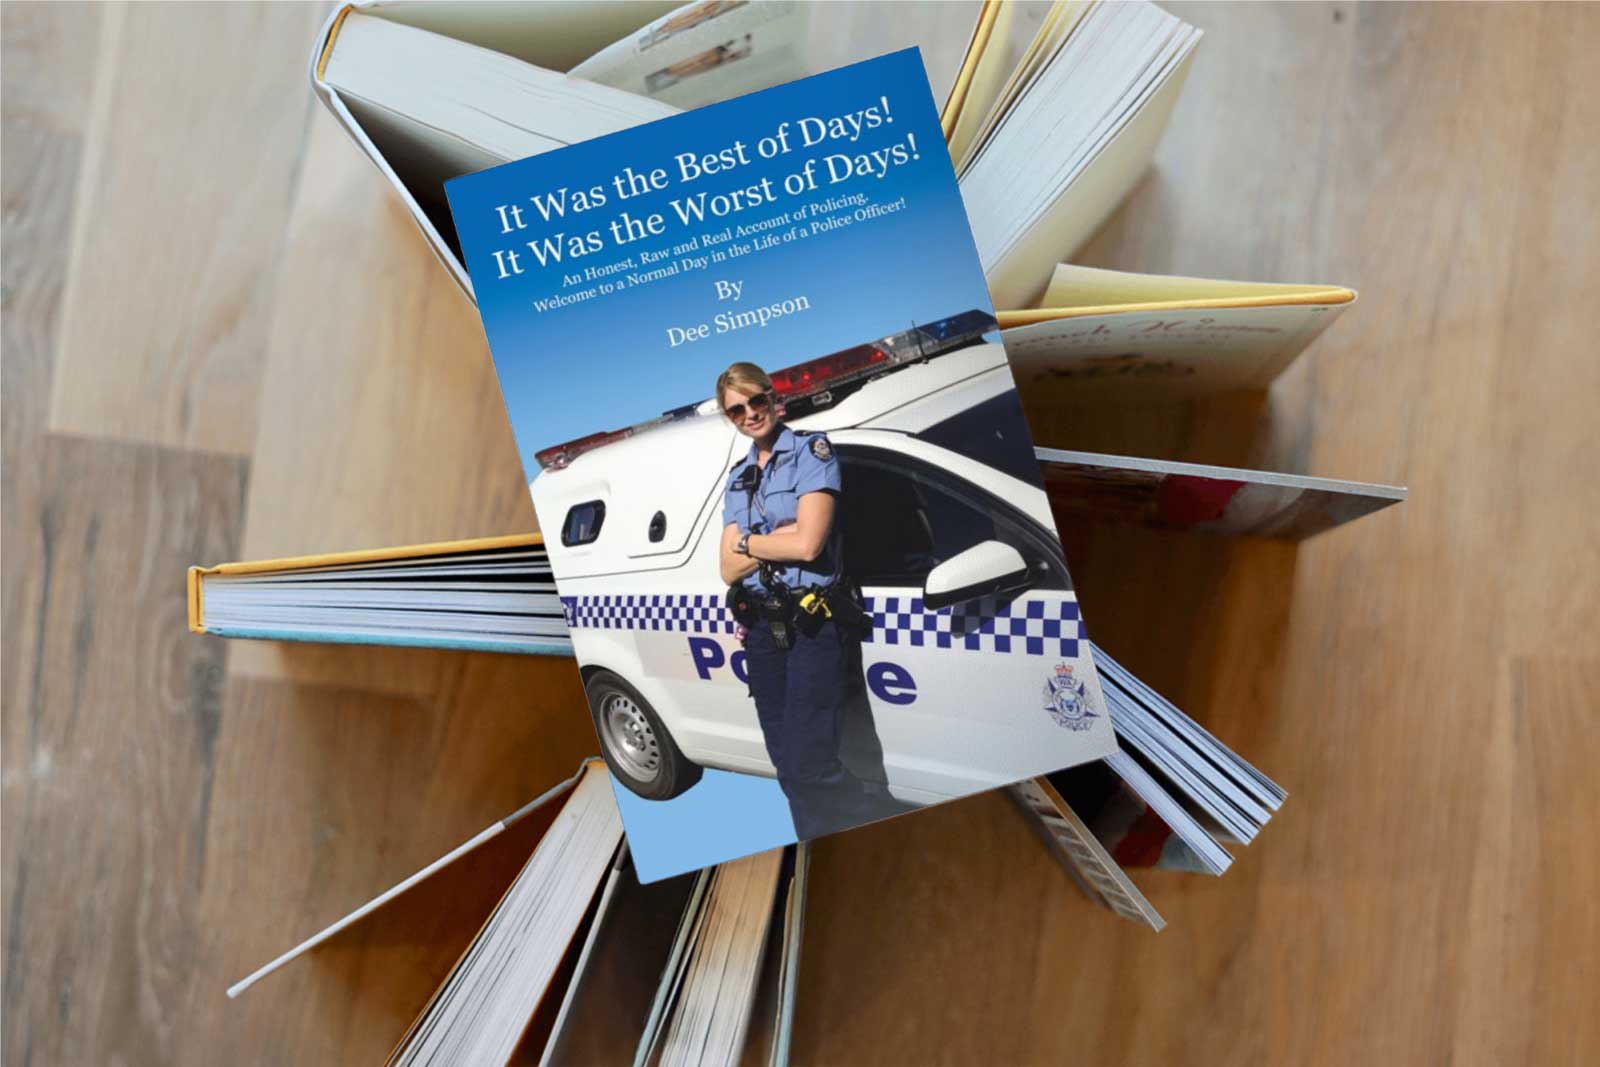 It Was the Best of Days! It Was the Worst of Days! An Honest, Raw and Real Account of Policing. Welcome to a Normal Day in the Life of a Police Officer! by Dee Simpson Author